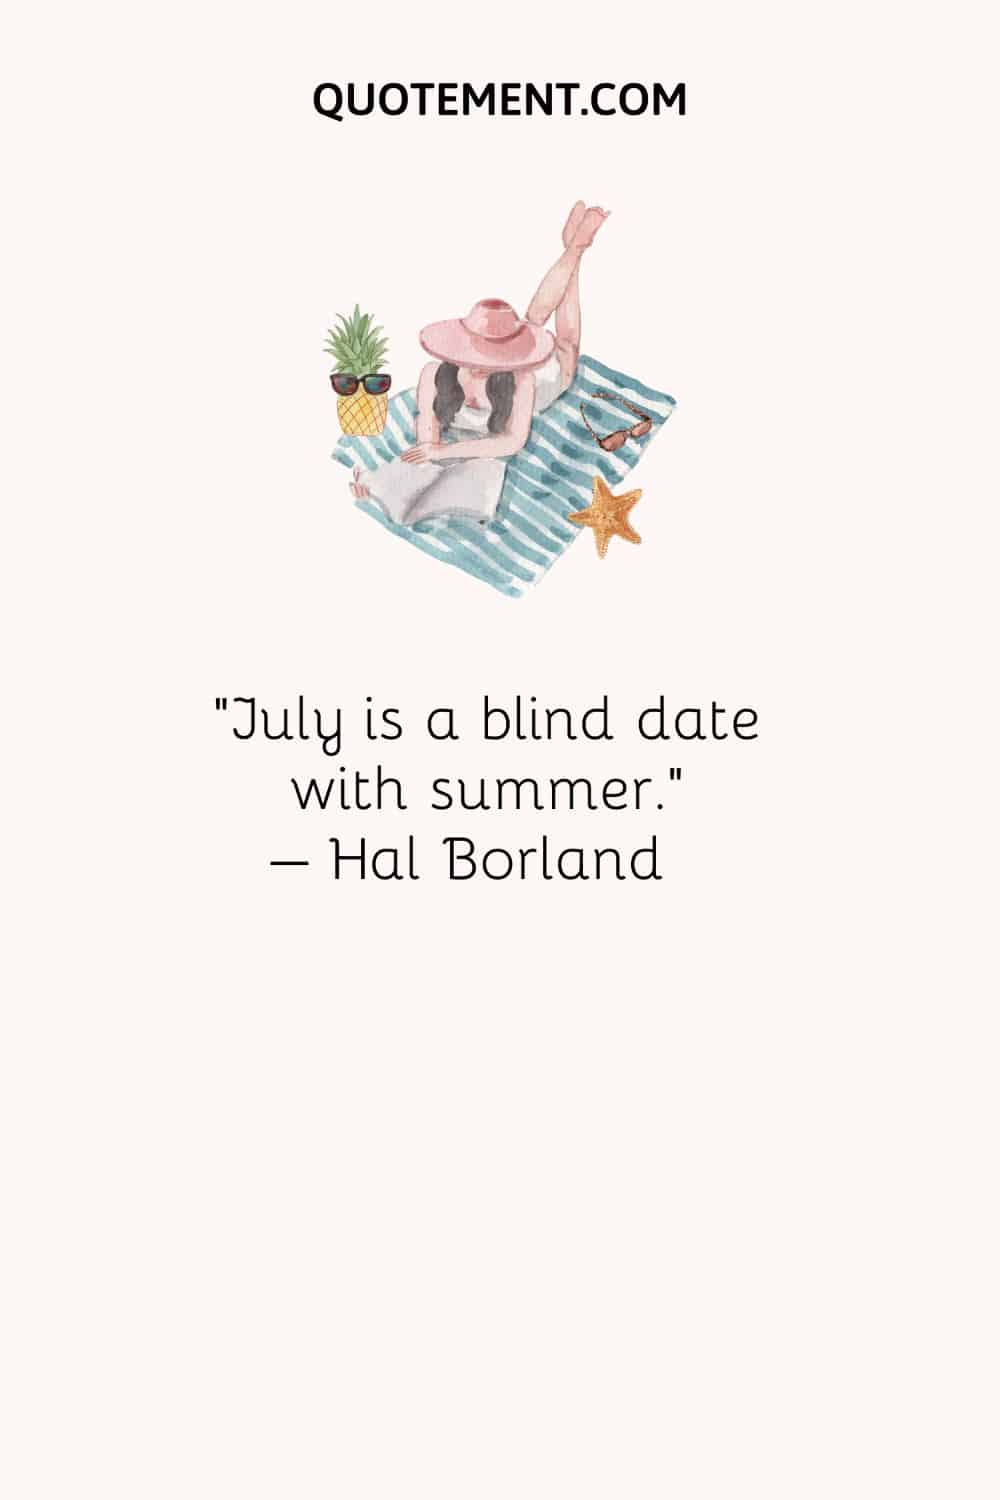 July is a blind date with summer. – Hal Borland